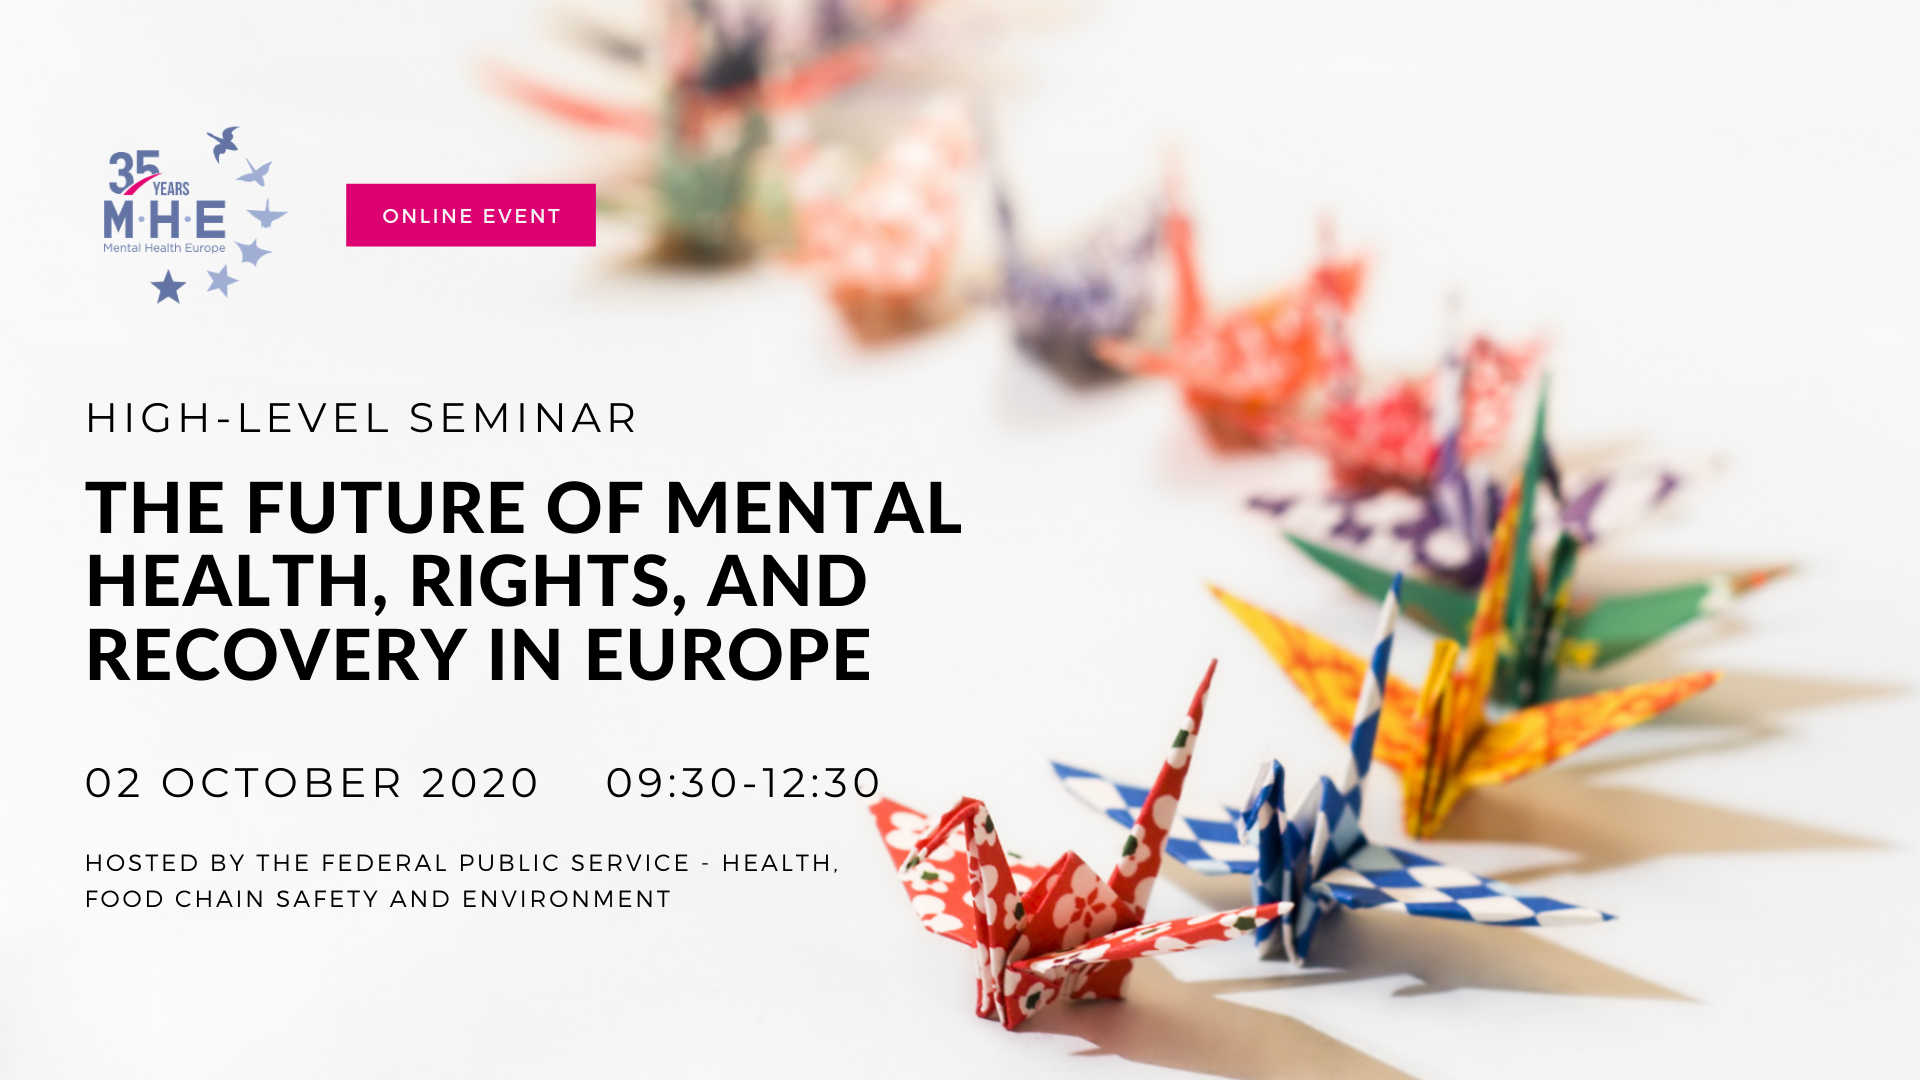 Register now Highlevel seminar on the future of mental health in